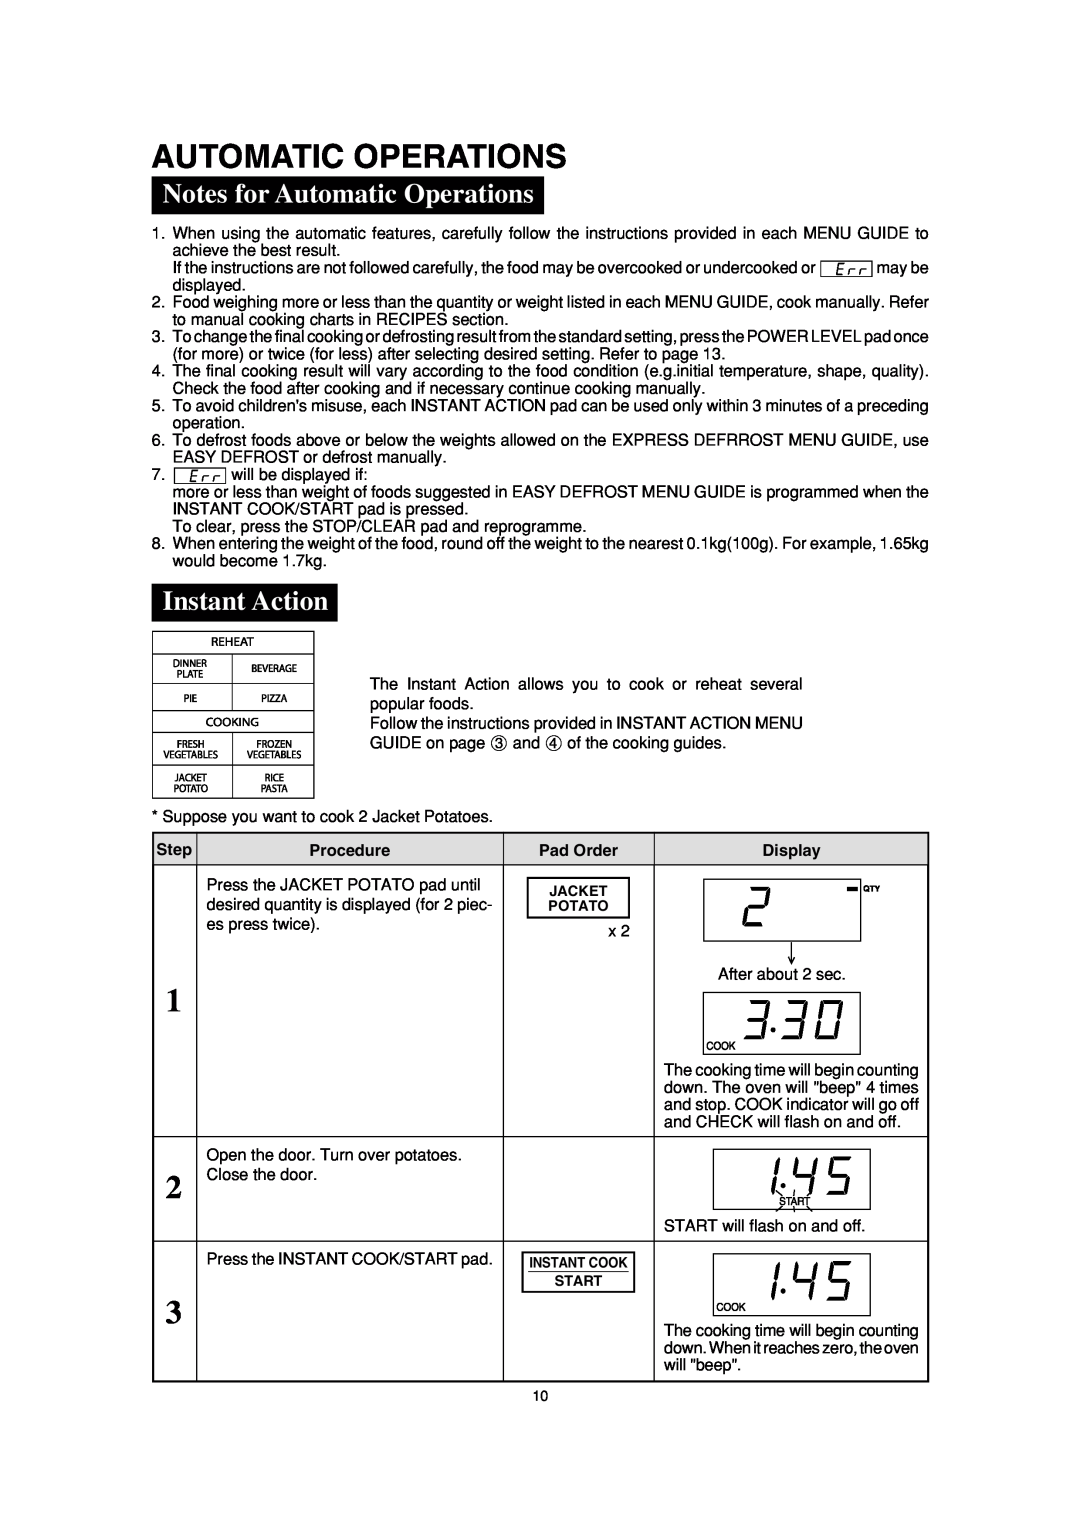 Sharp R-390H(S) operation manual Notes for Automatic Operations, Instant Action 